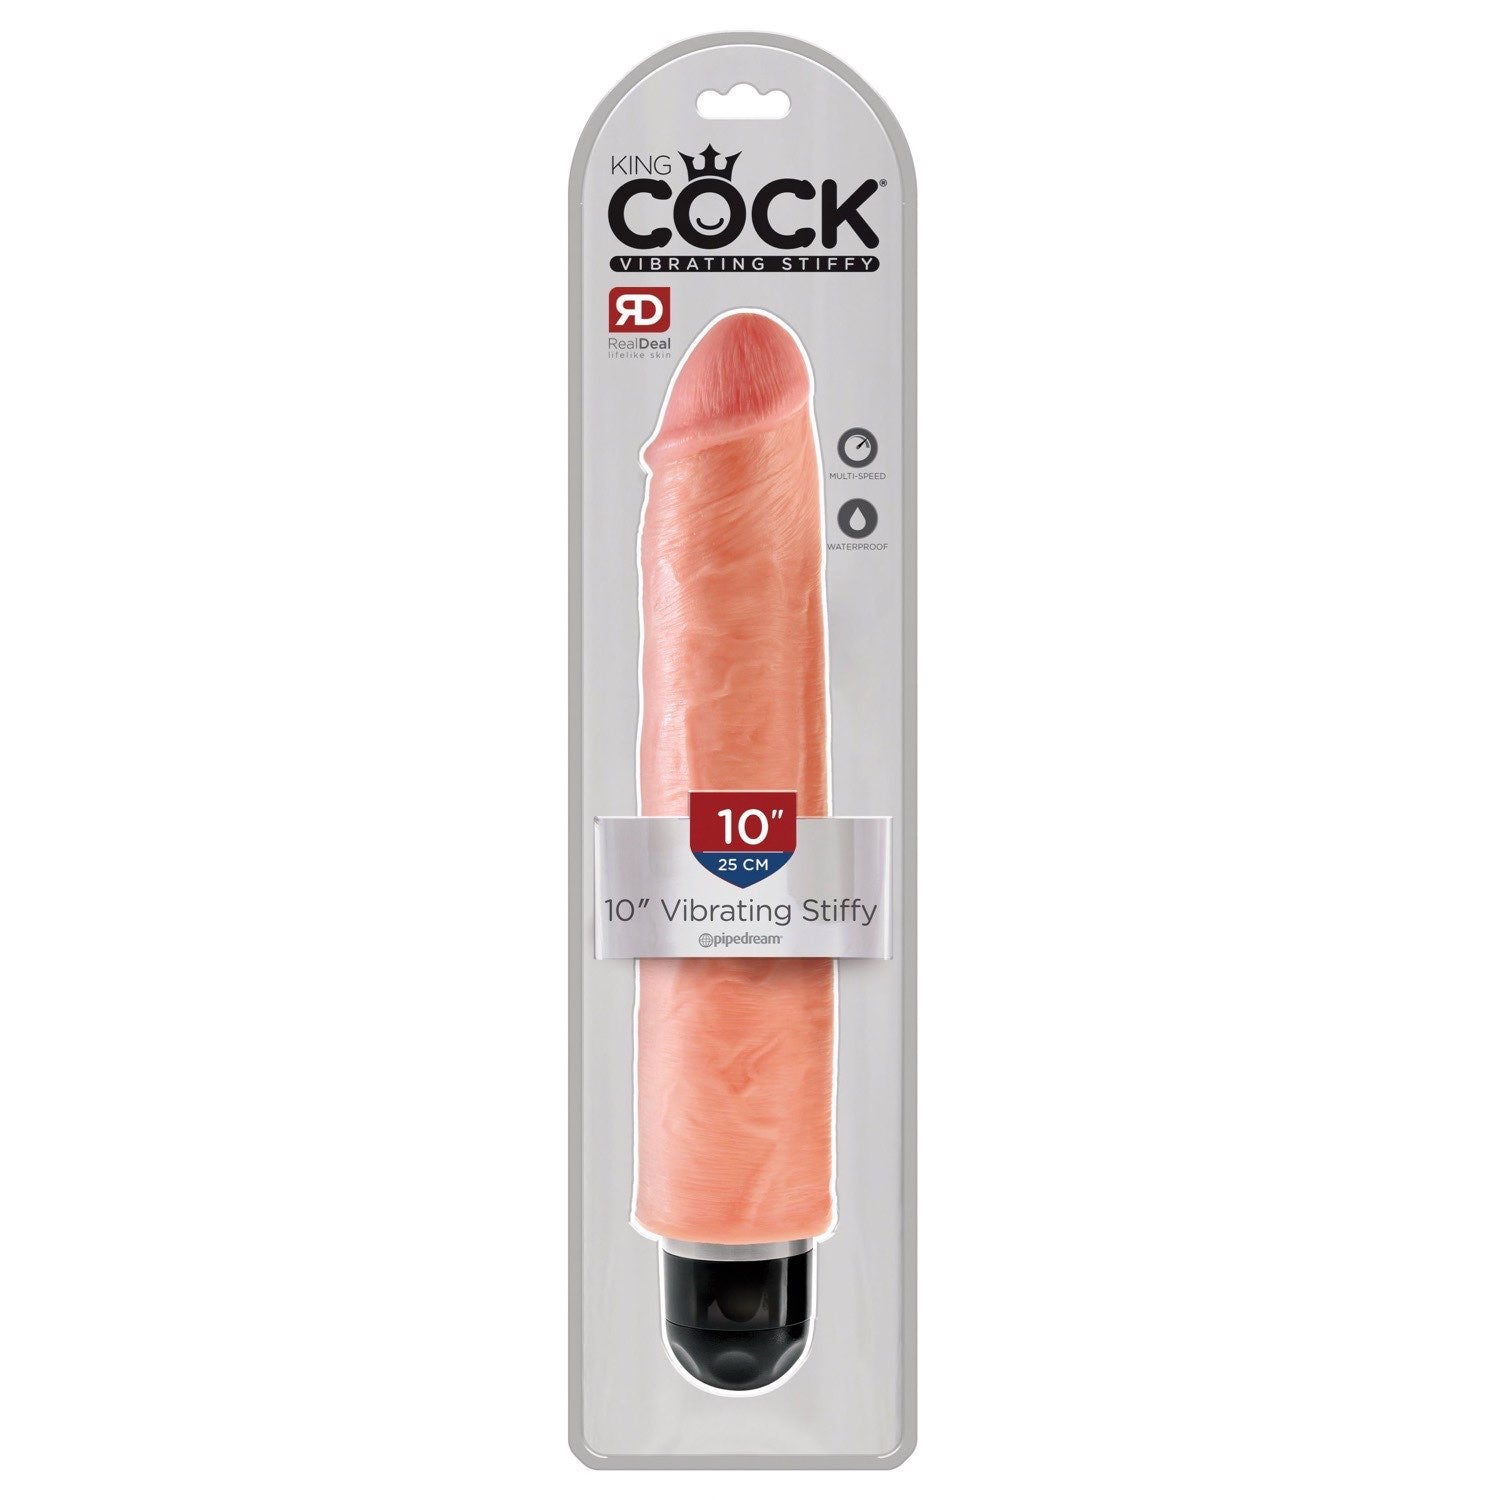 King Cock 10&quot; Vibrating Stiffy - Flesh 25.4 cm Vibrating Dong by Pipedream